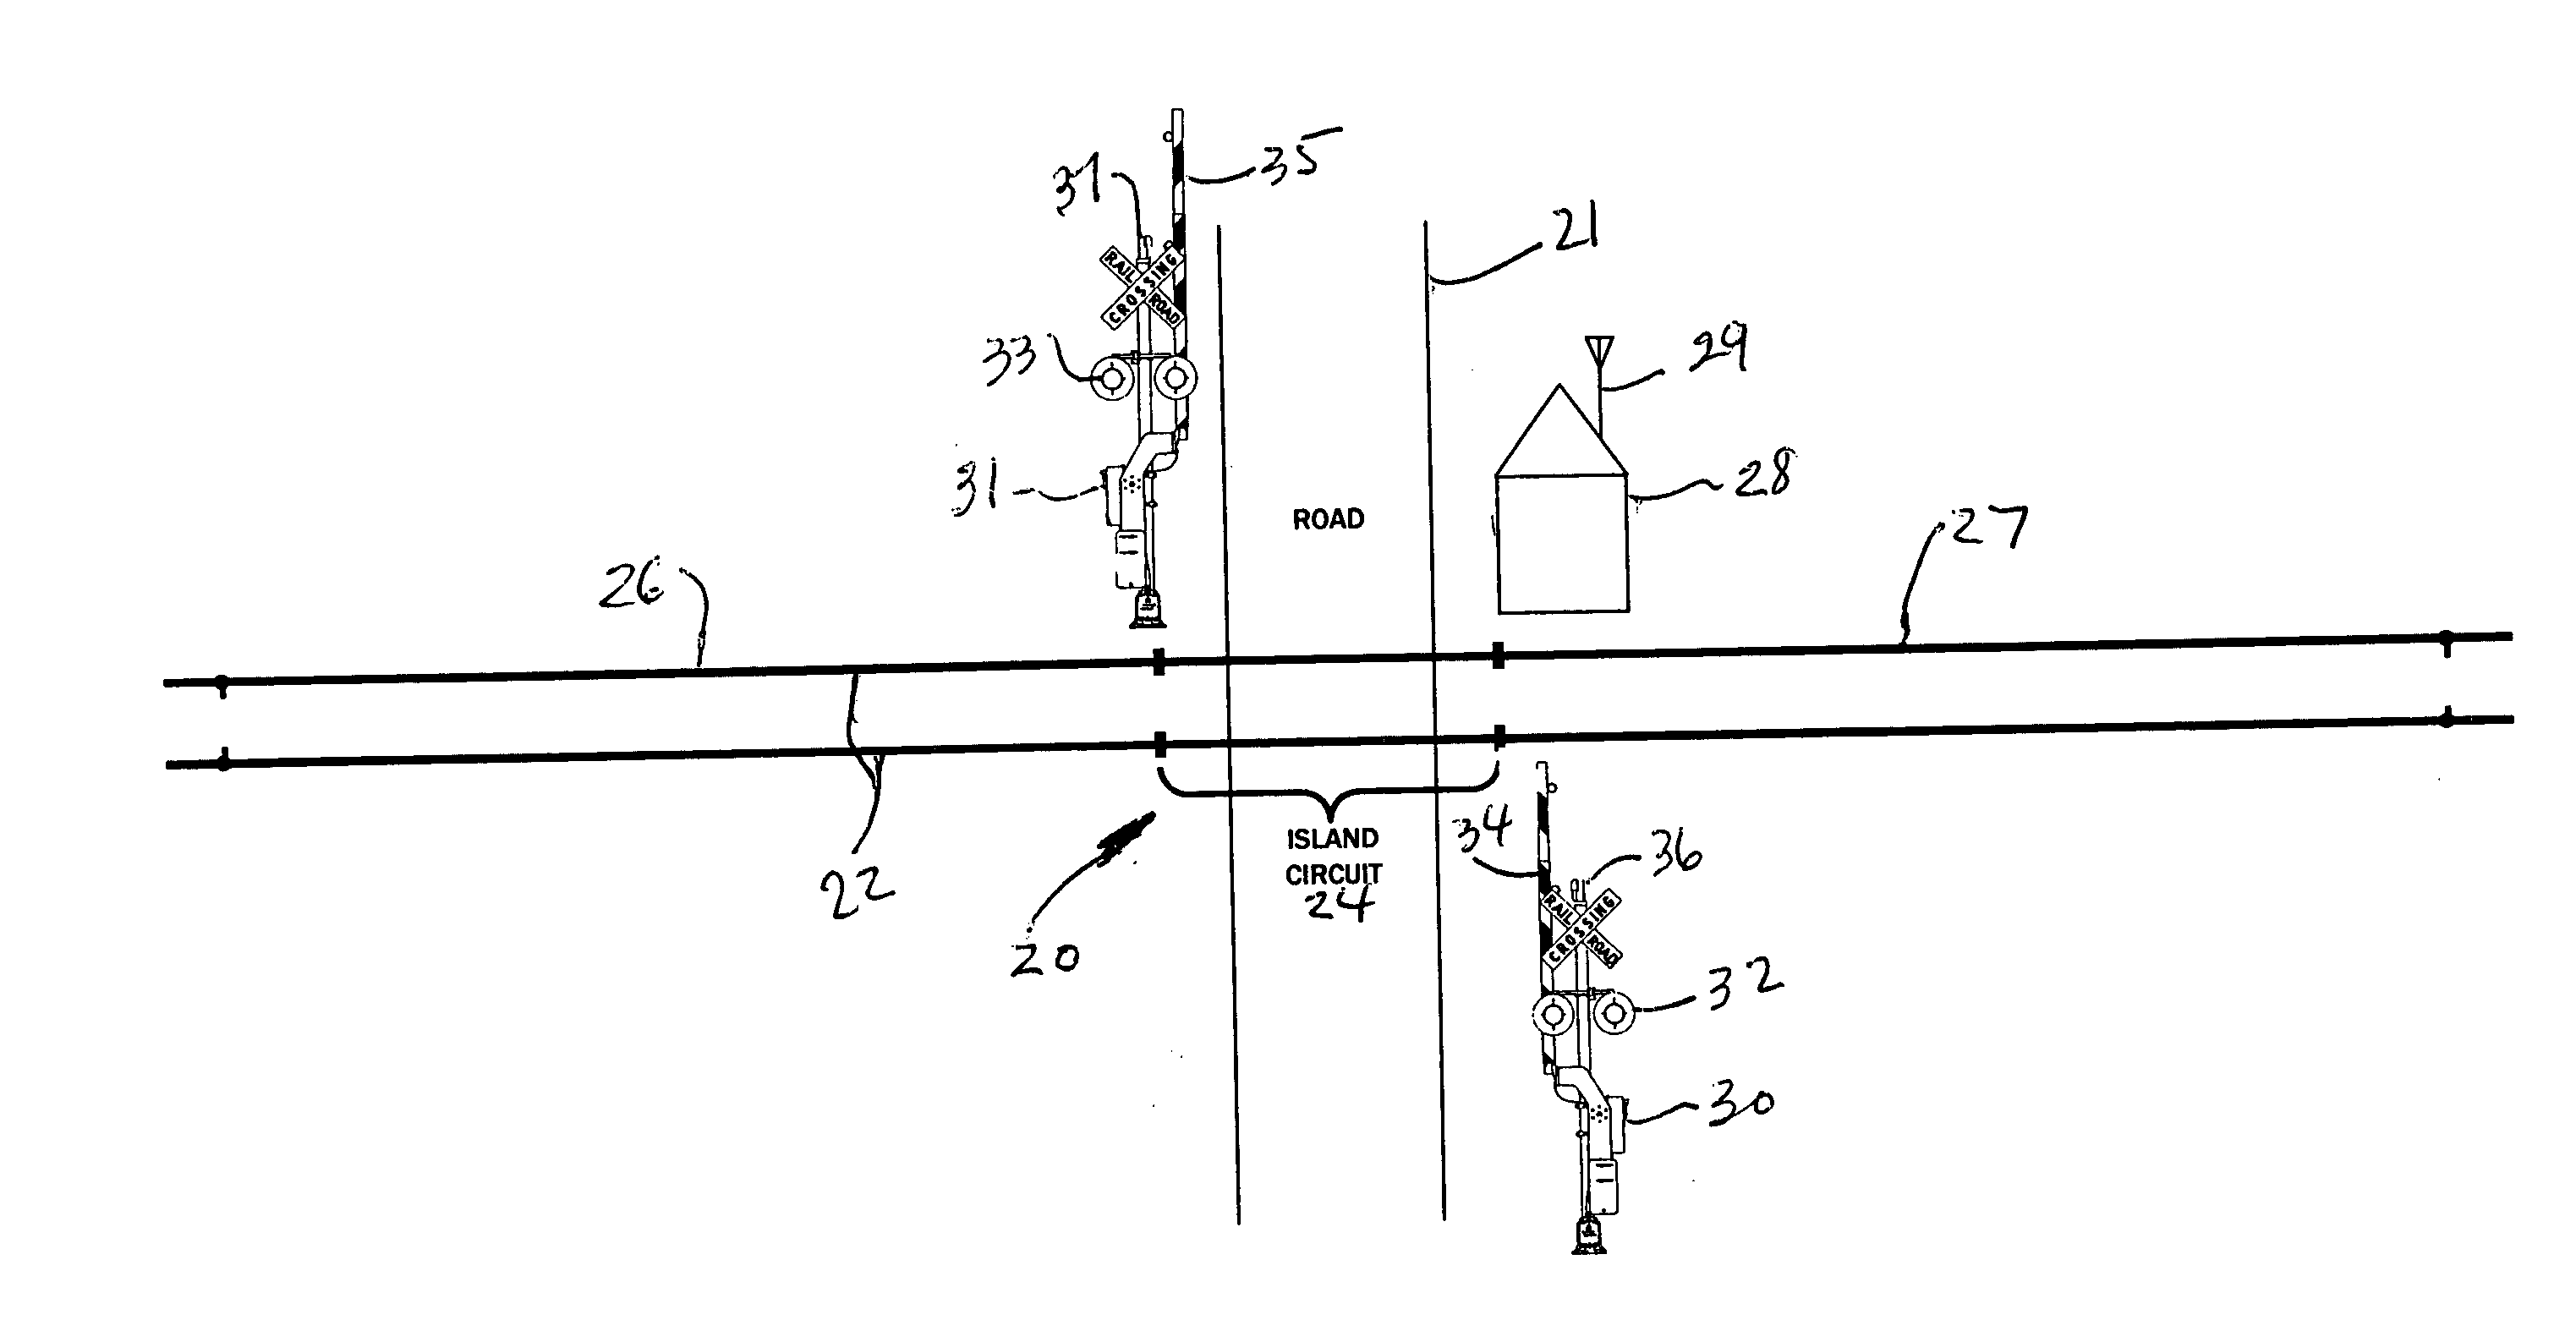 Highway-rail grade crossing controller with out of service mode